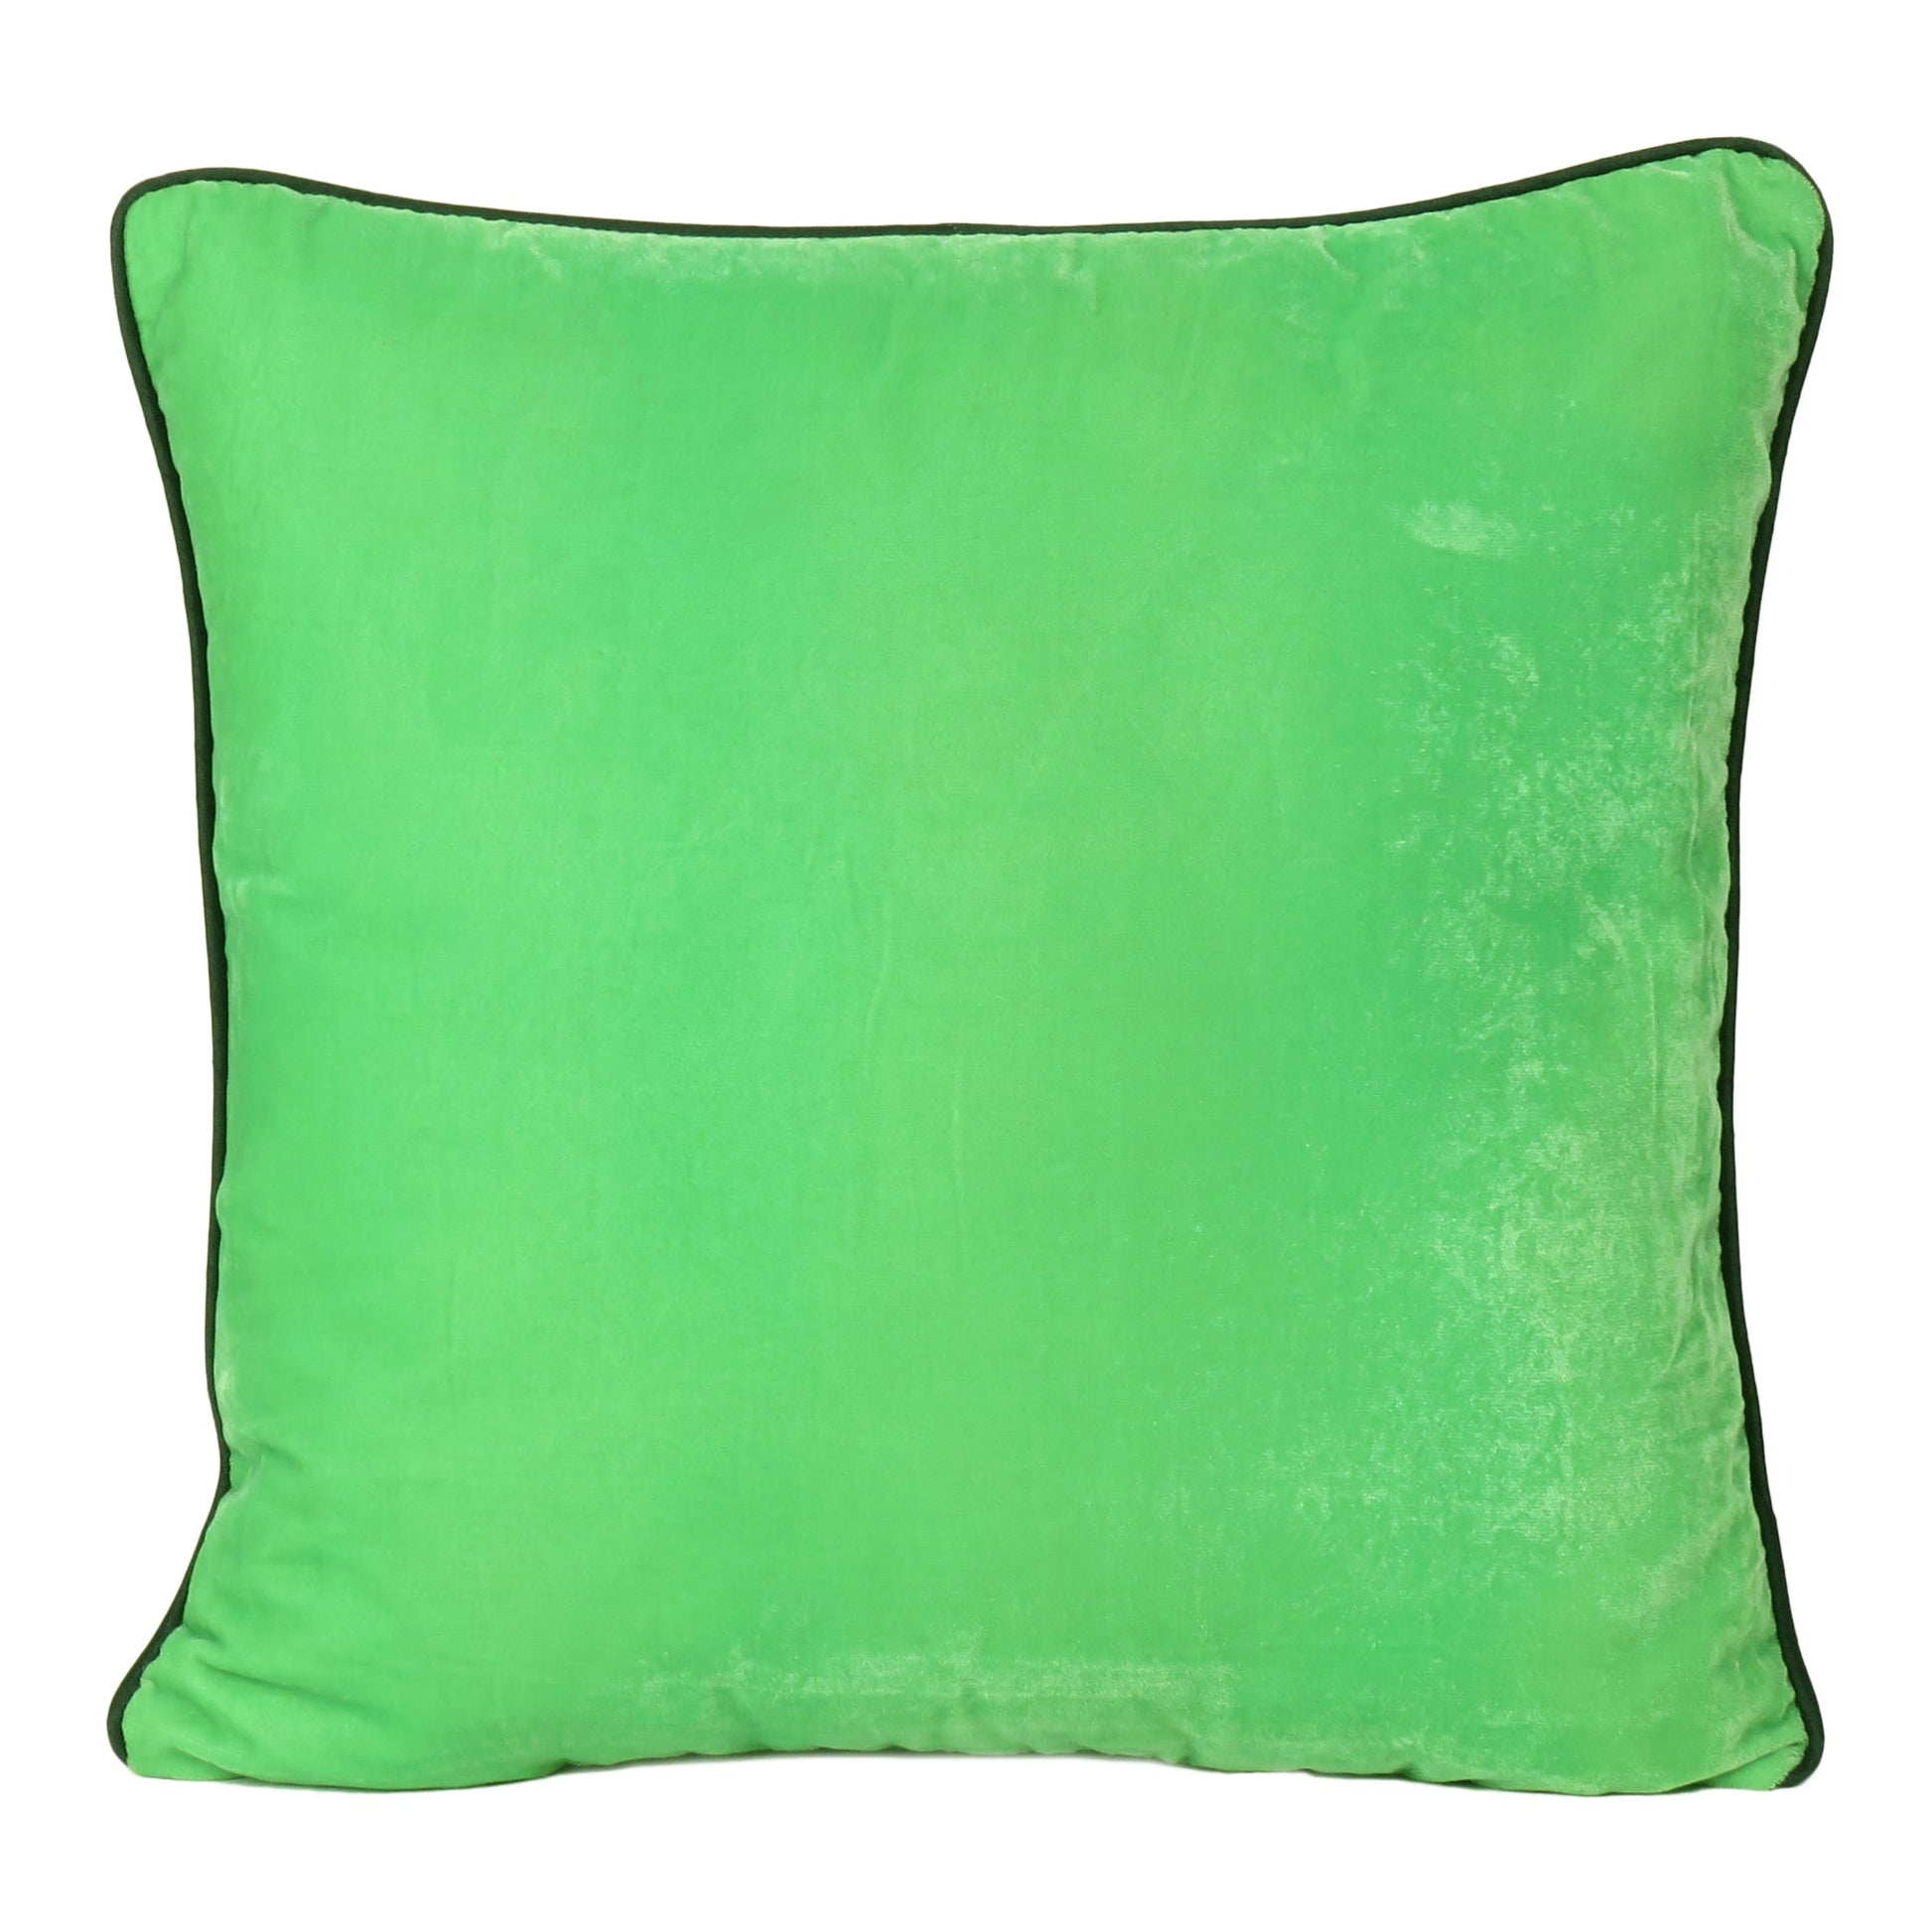 Green Velvet Cushion Cover with Dark Green Piping Edge in Set of 2 